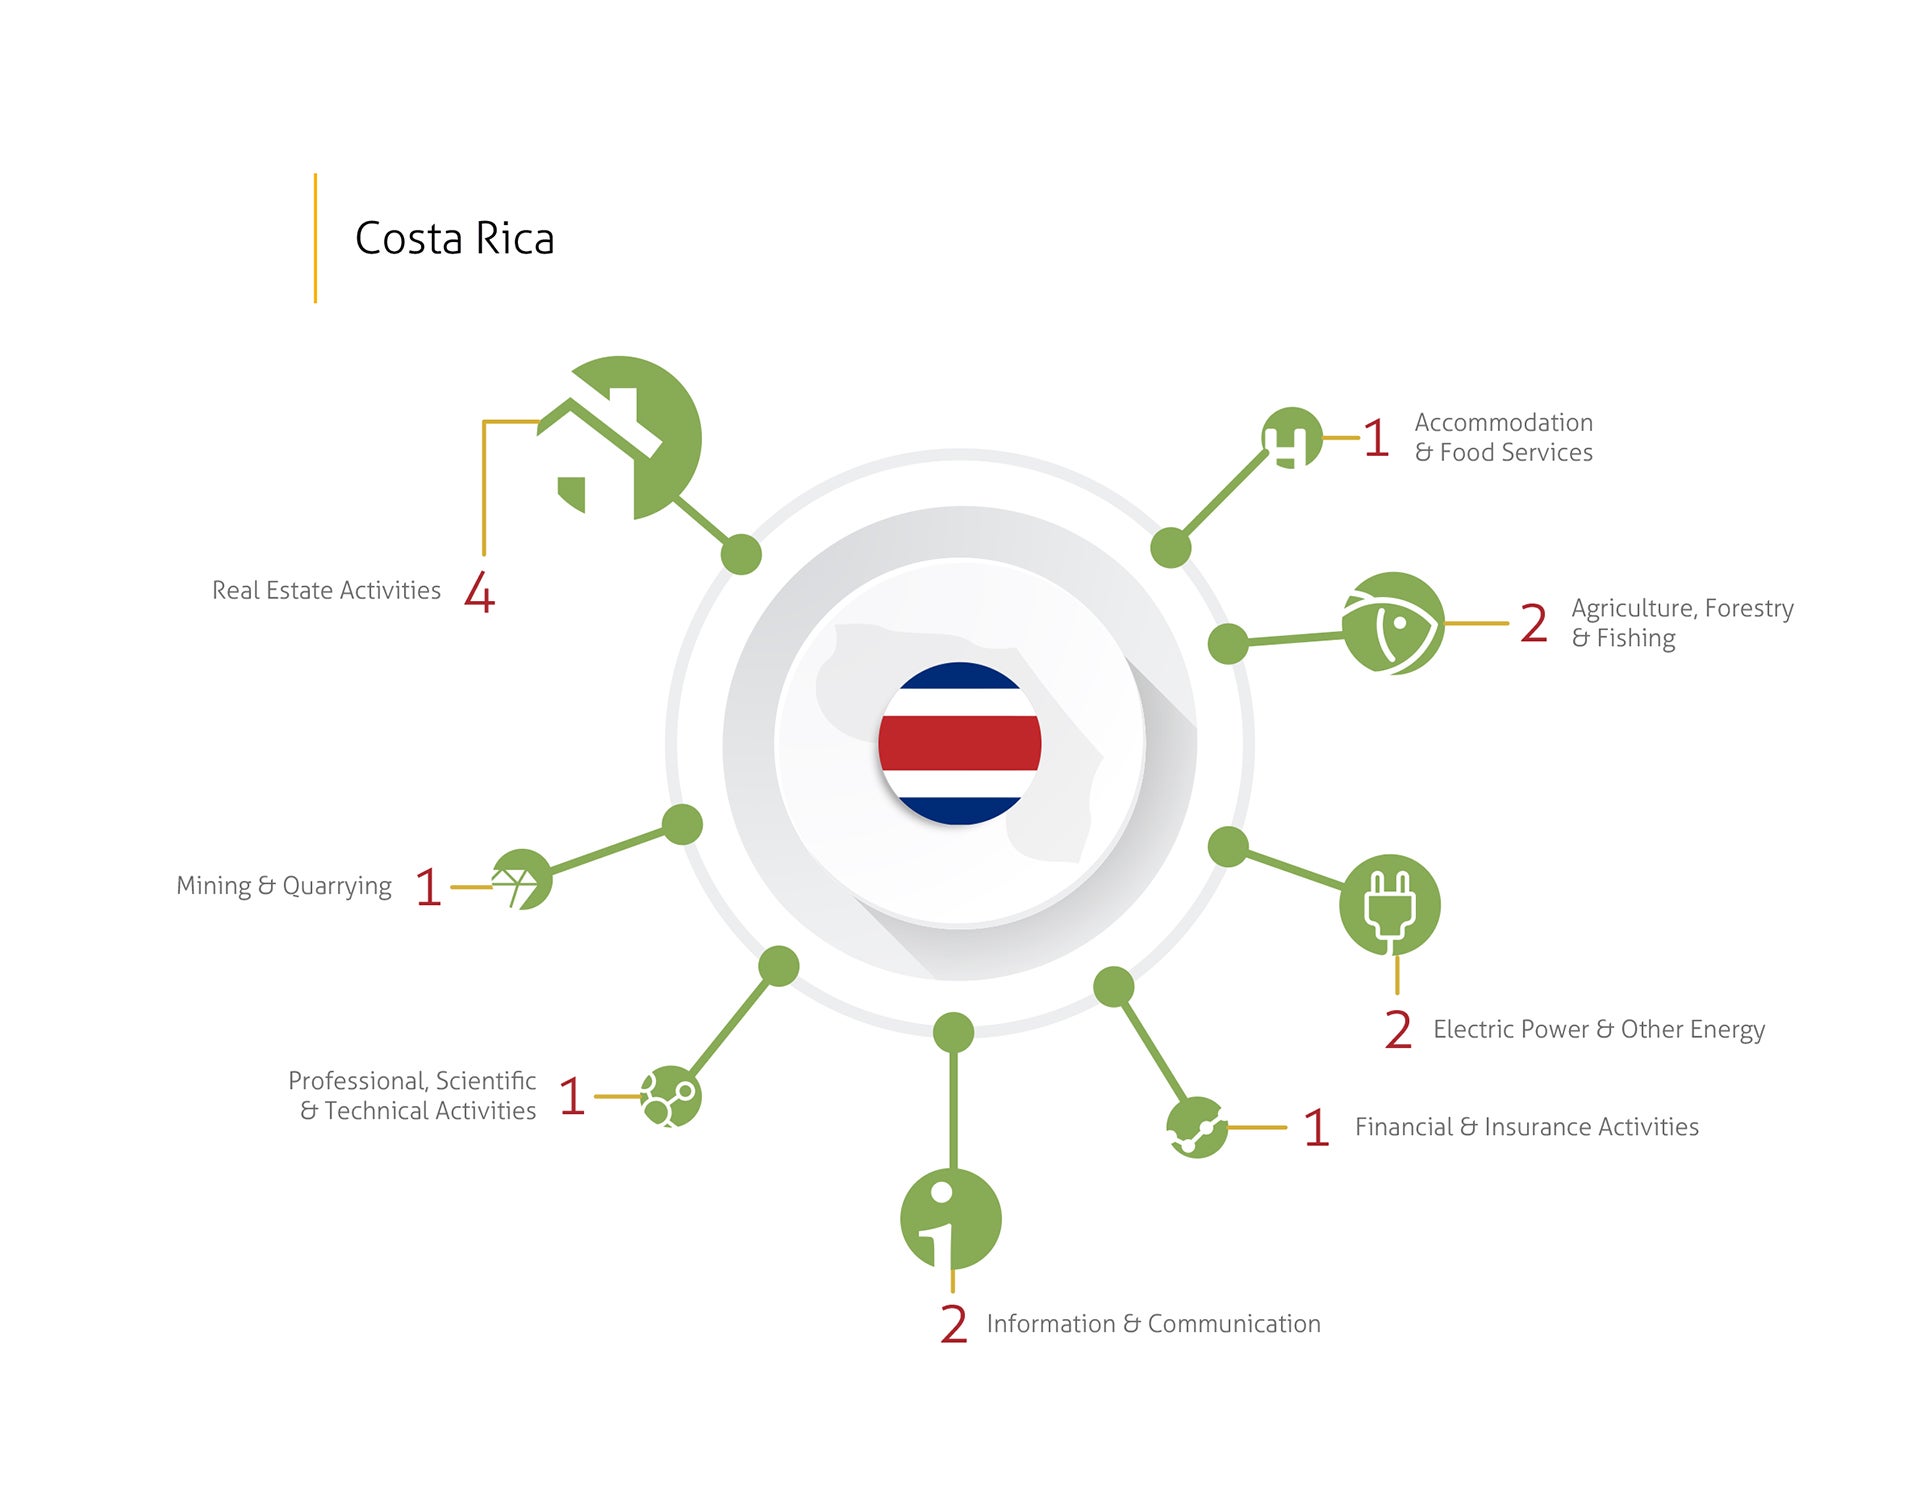 Industries involved in disputes - Costa Rica